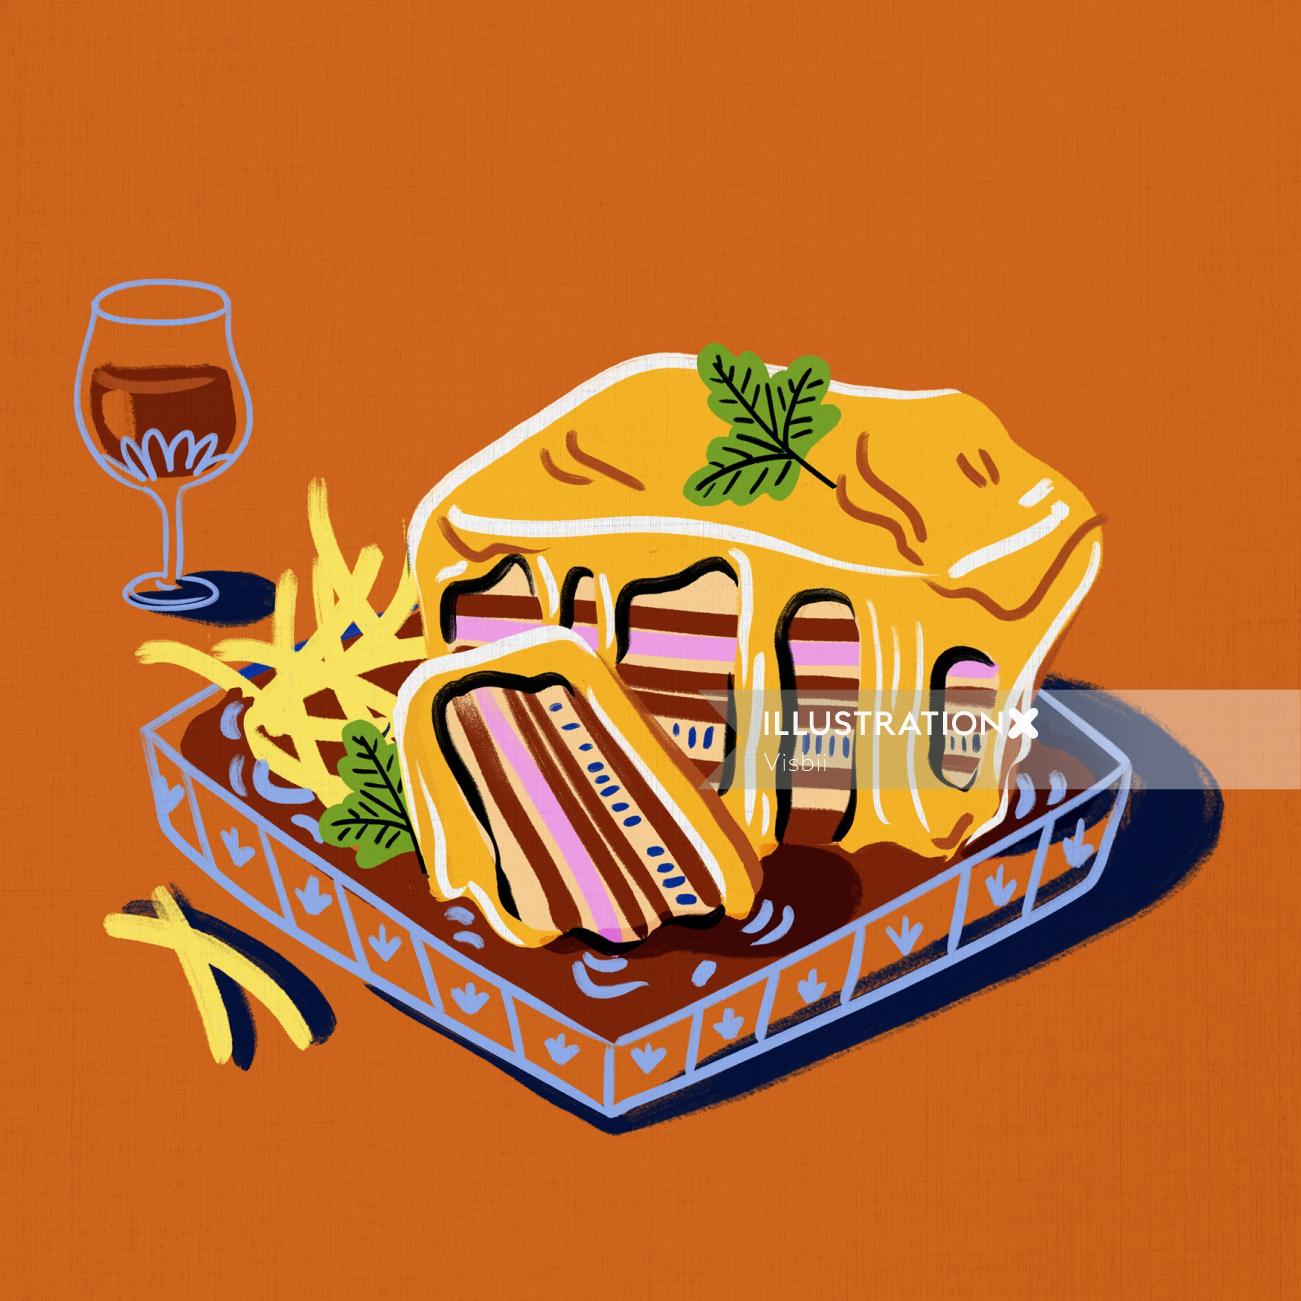 Cheese sandwich with fries food  illustration